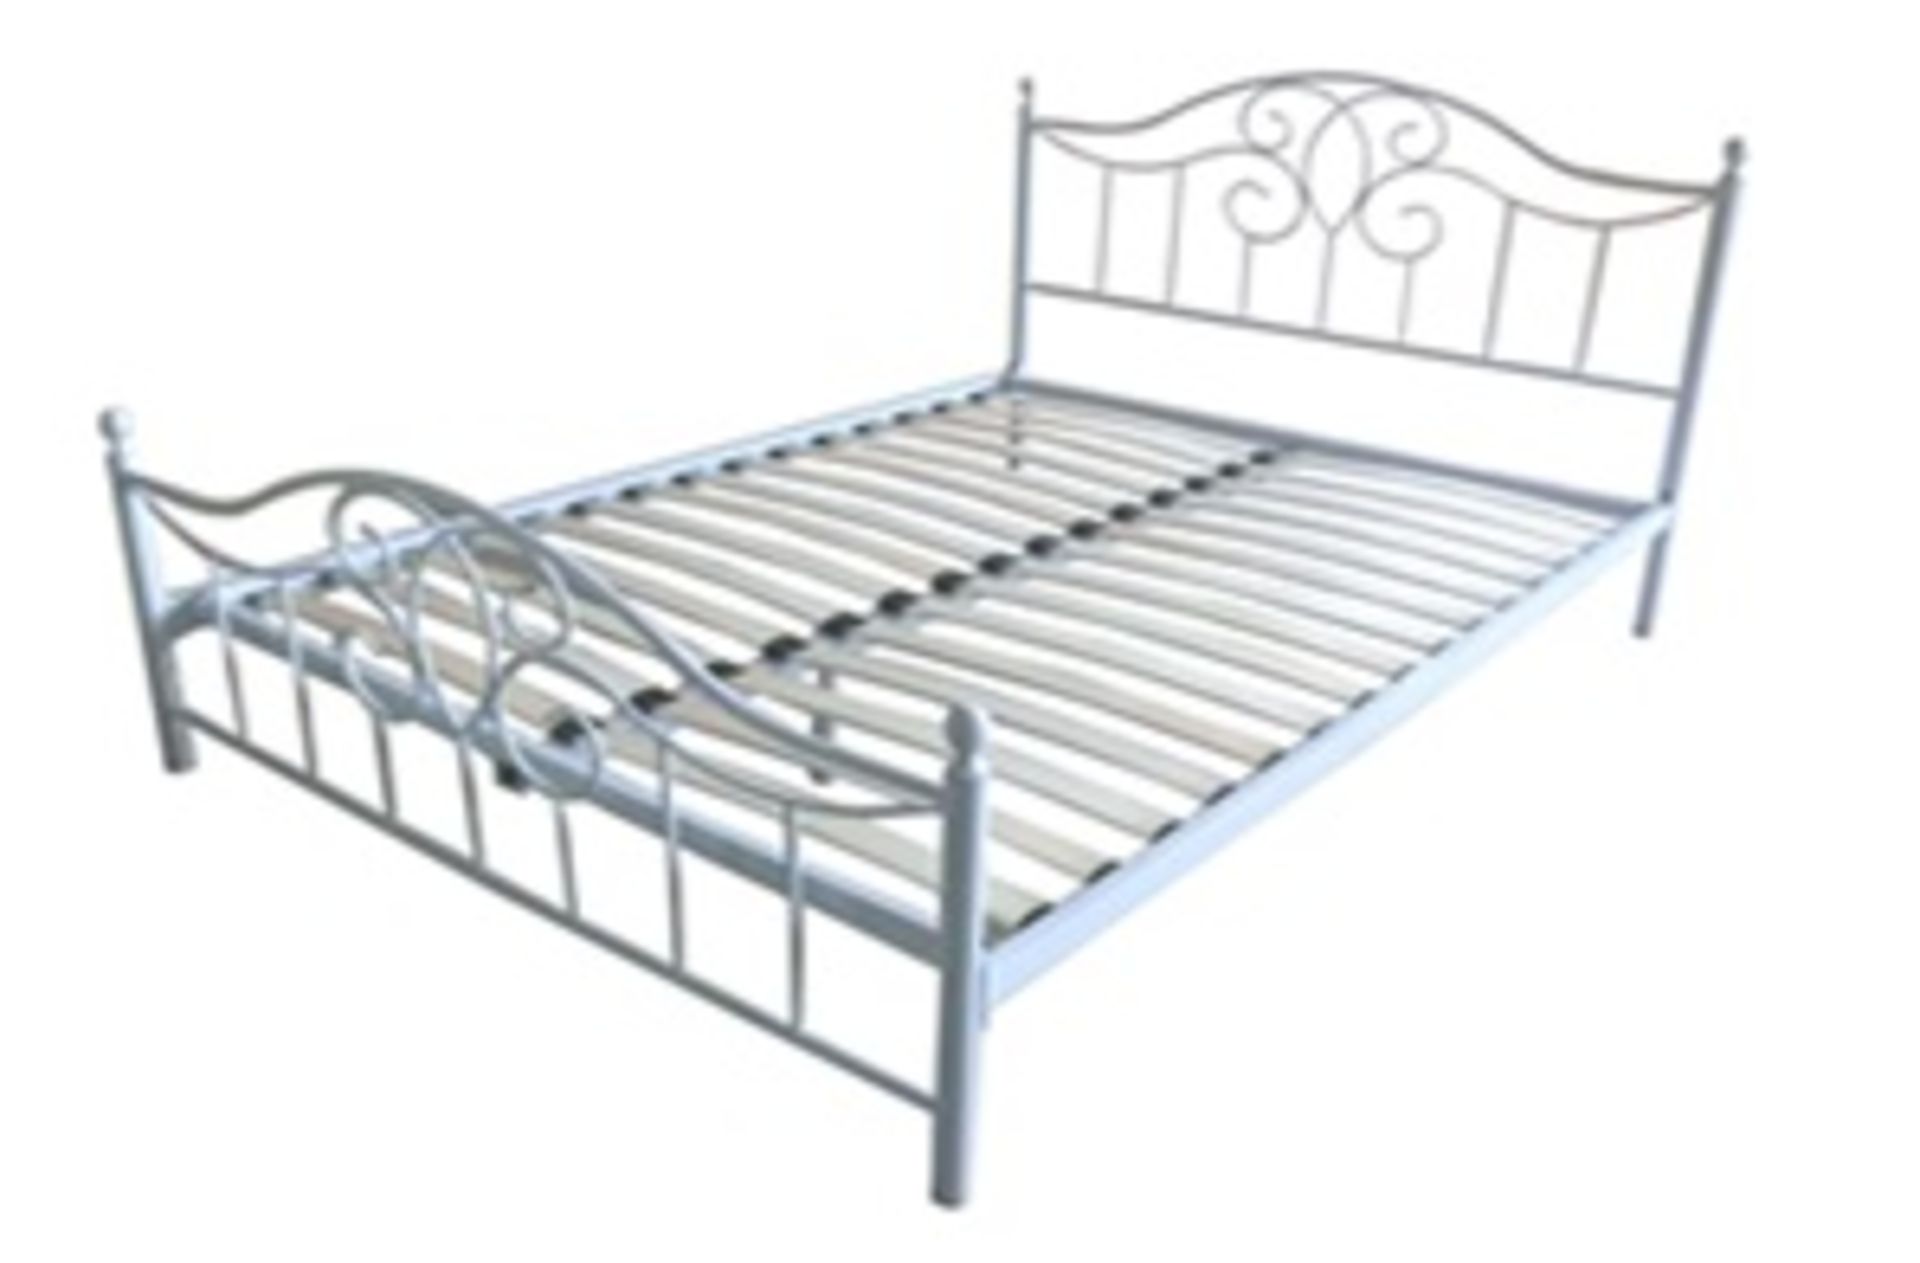 1 x Metal Double Bed Frame Black - BED509Blk (Brand New & Boxed)